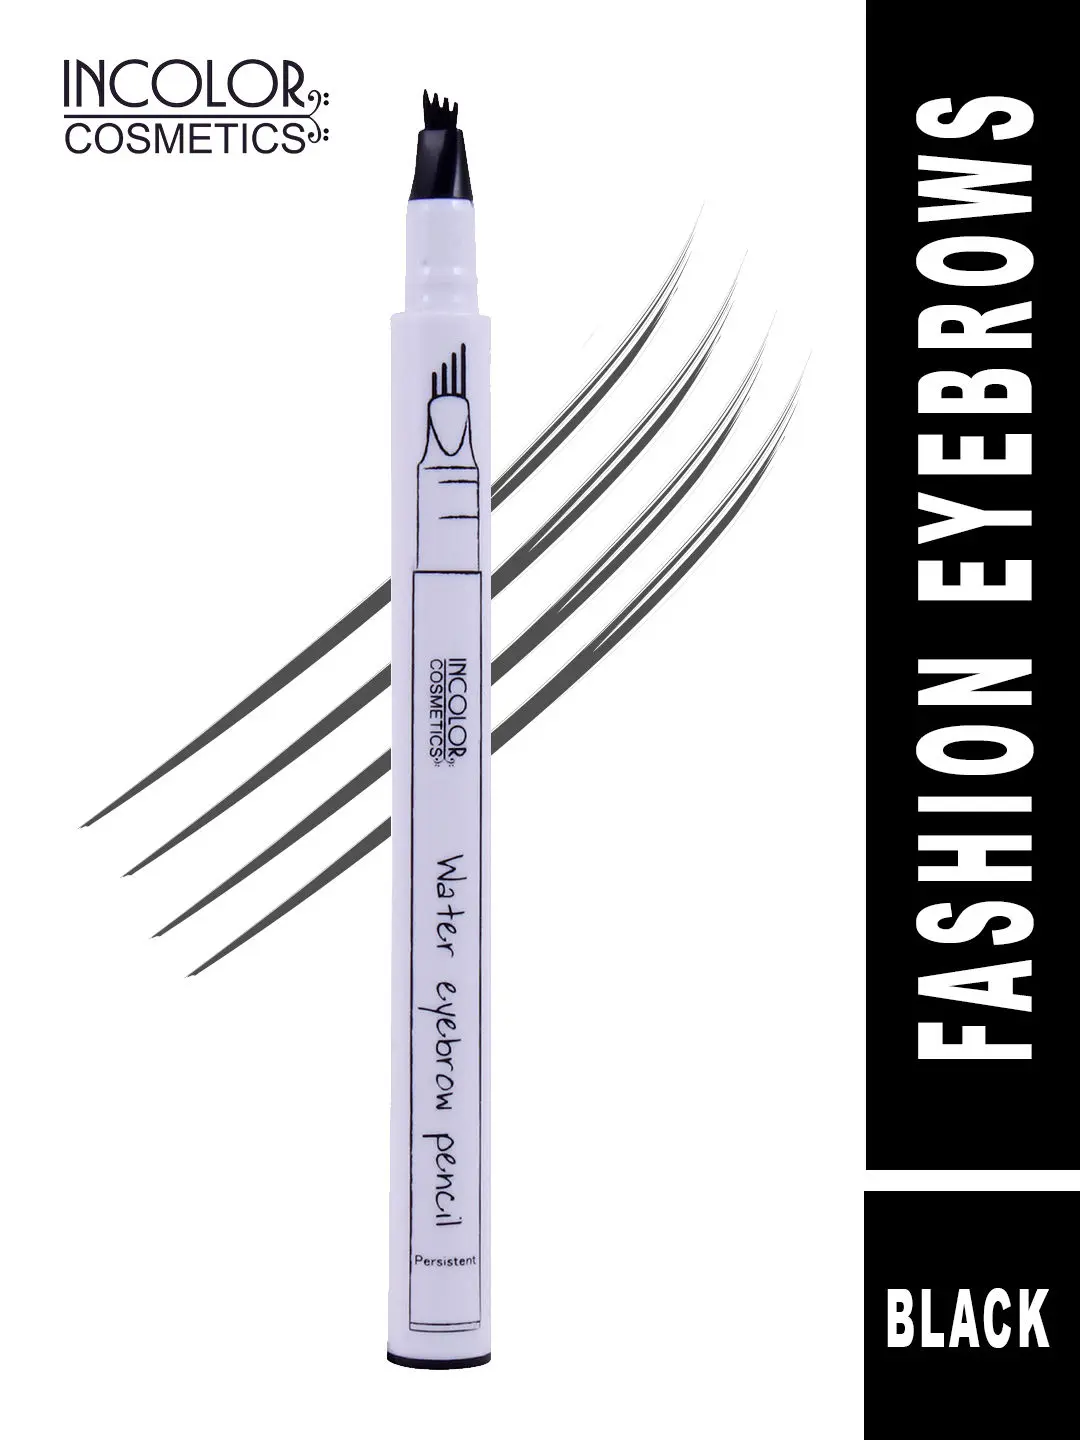 Incolor 4 Forked Long Lasting Fashion Eyebrow Pencil Black 01 (2g)